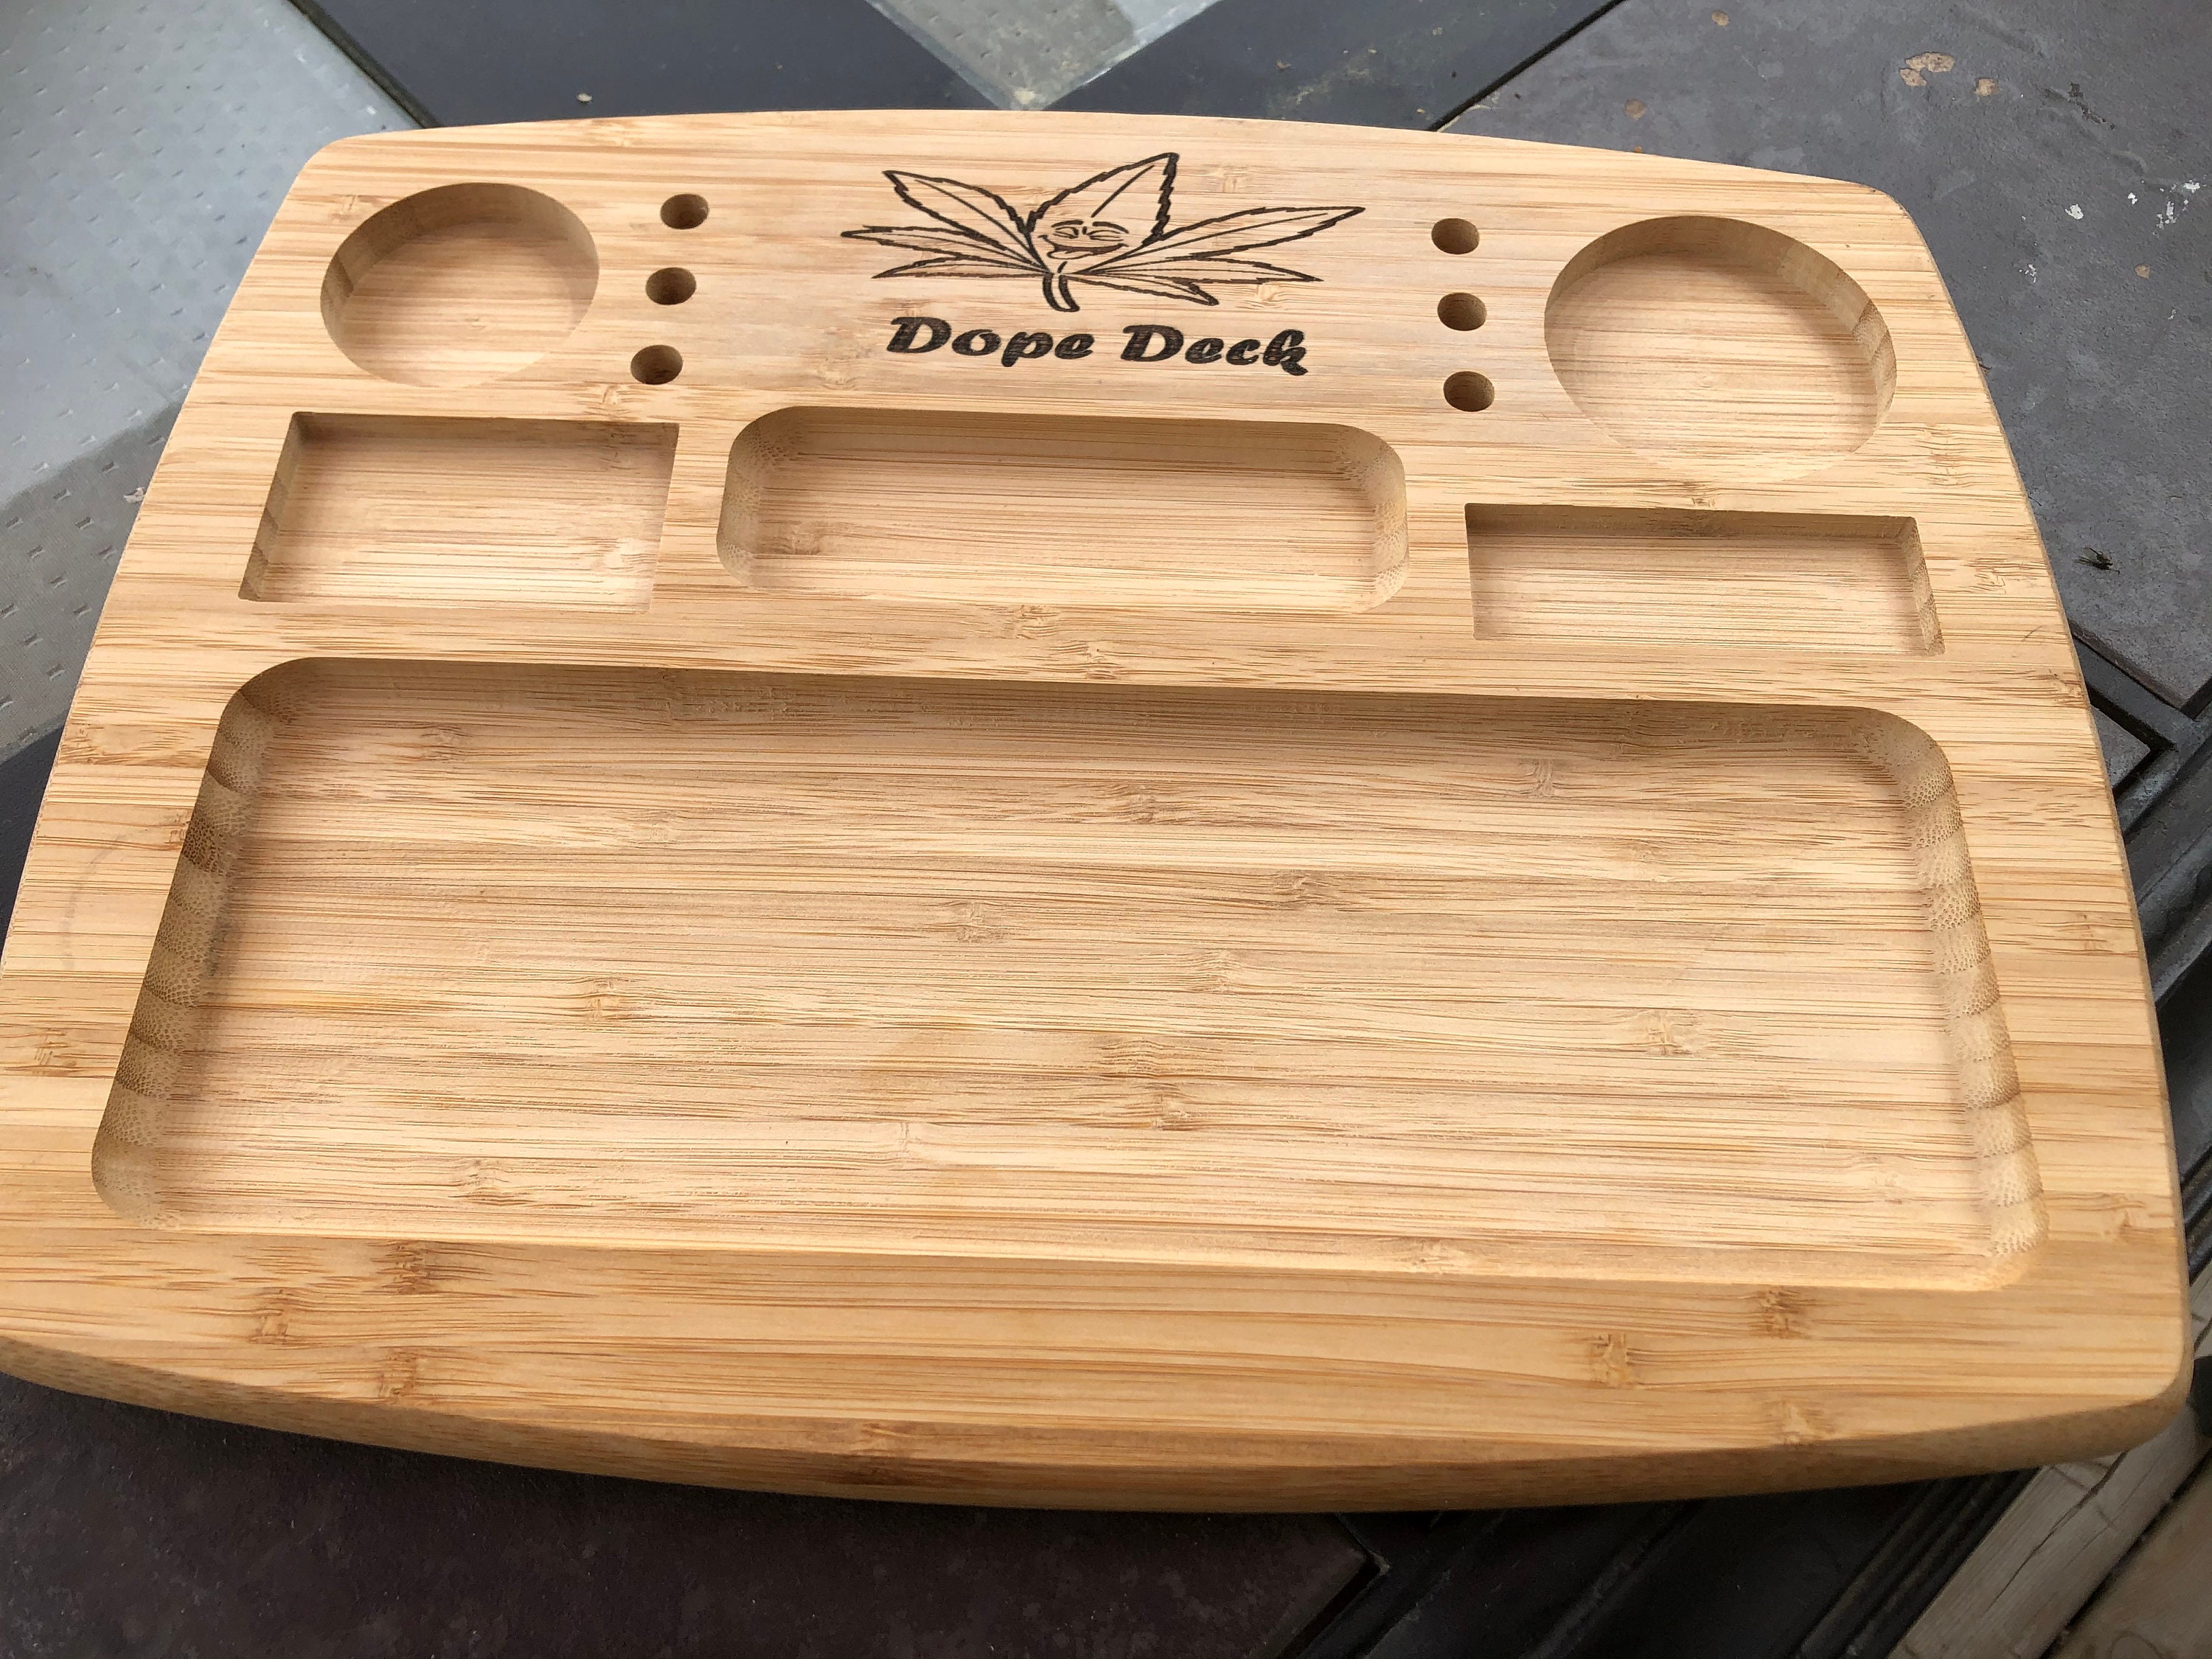 Leaf Rolling Tray Made From Walnut, Cherry or Maple. 